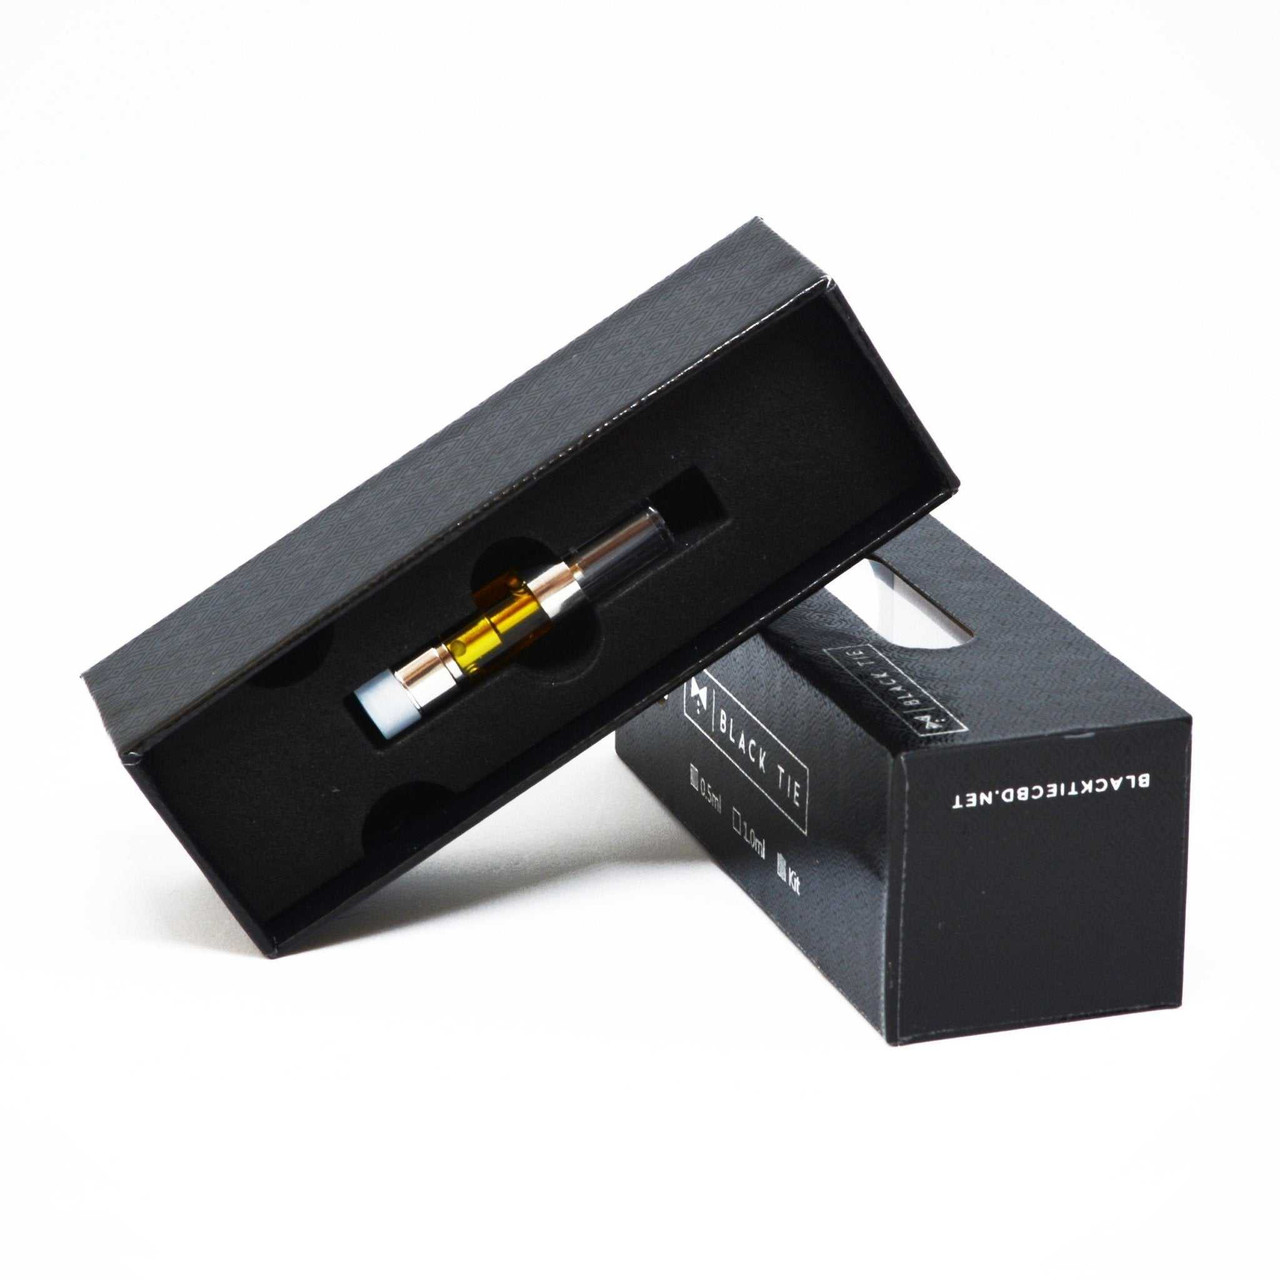 Your Black Label Full Spectrum Extract Pen Questions, Answered